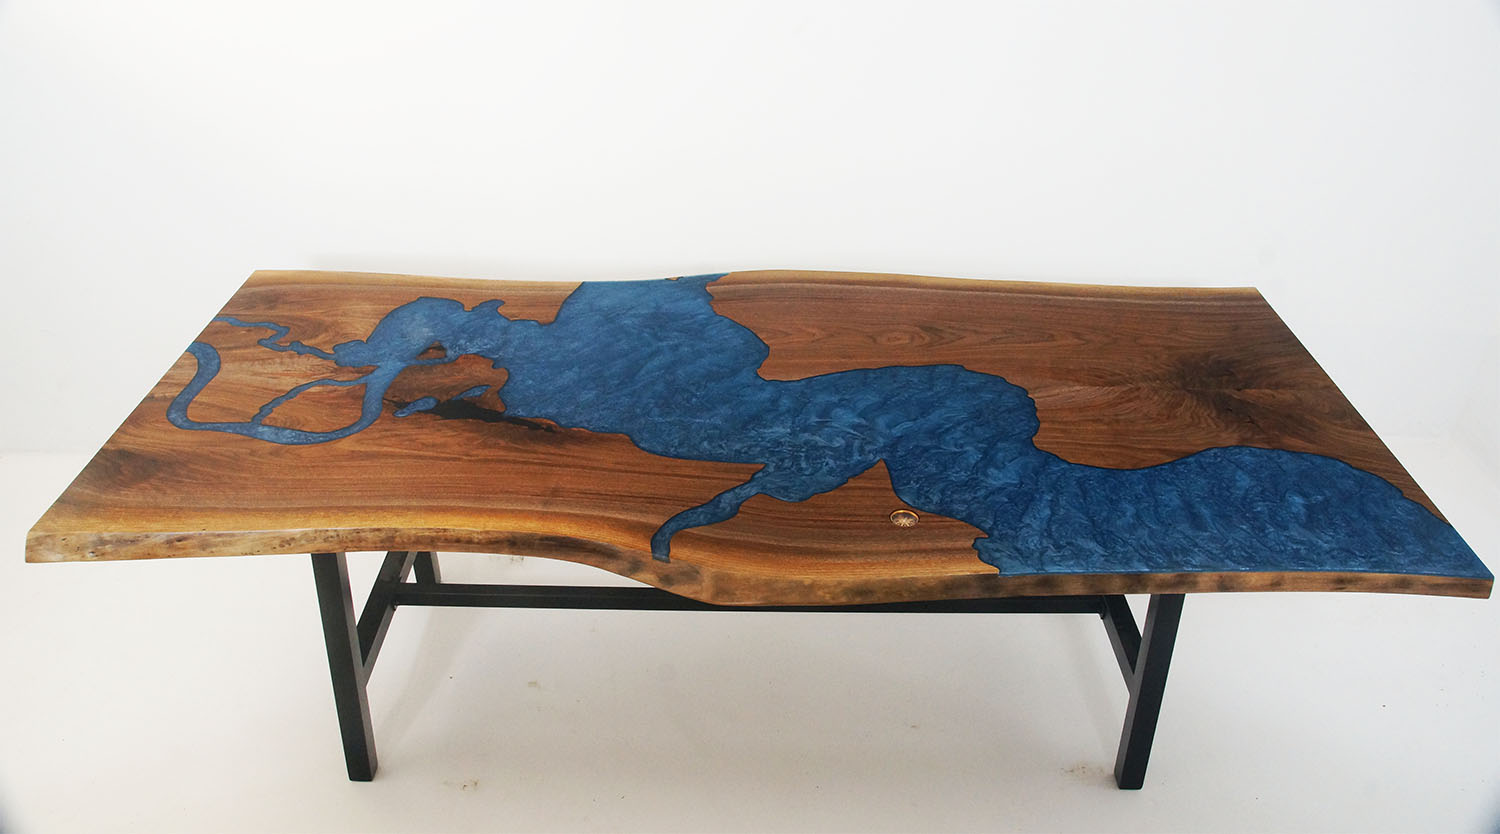 beach epoxy river table with engraved map of Chesapeake Bay